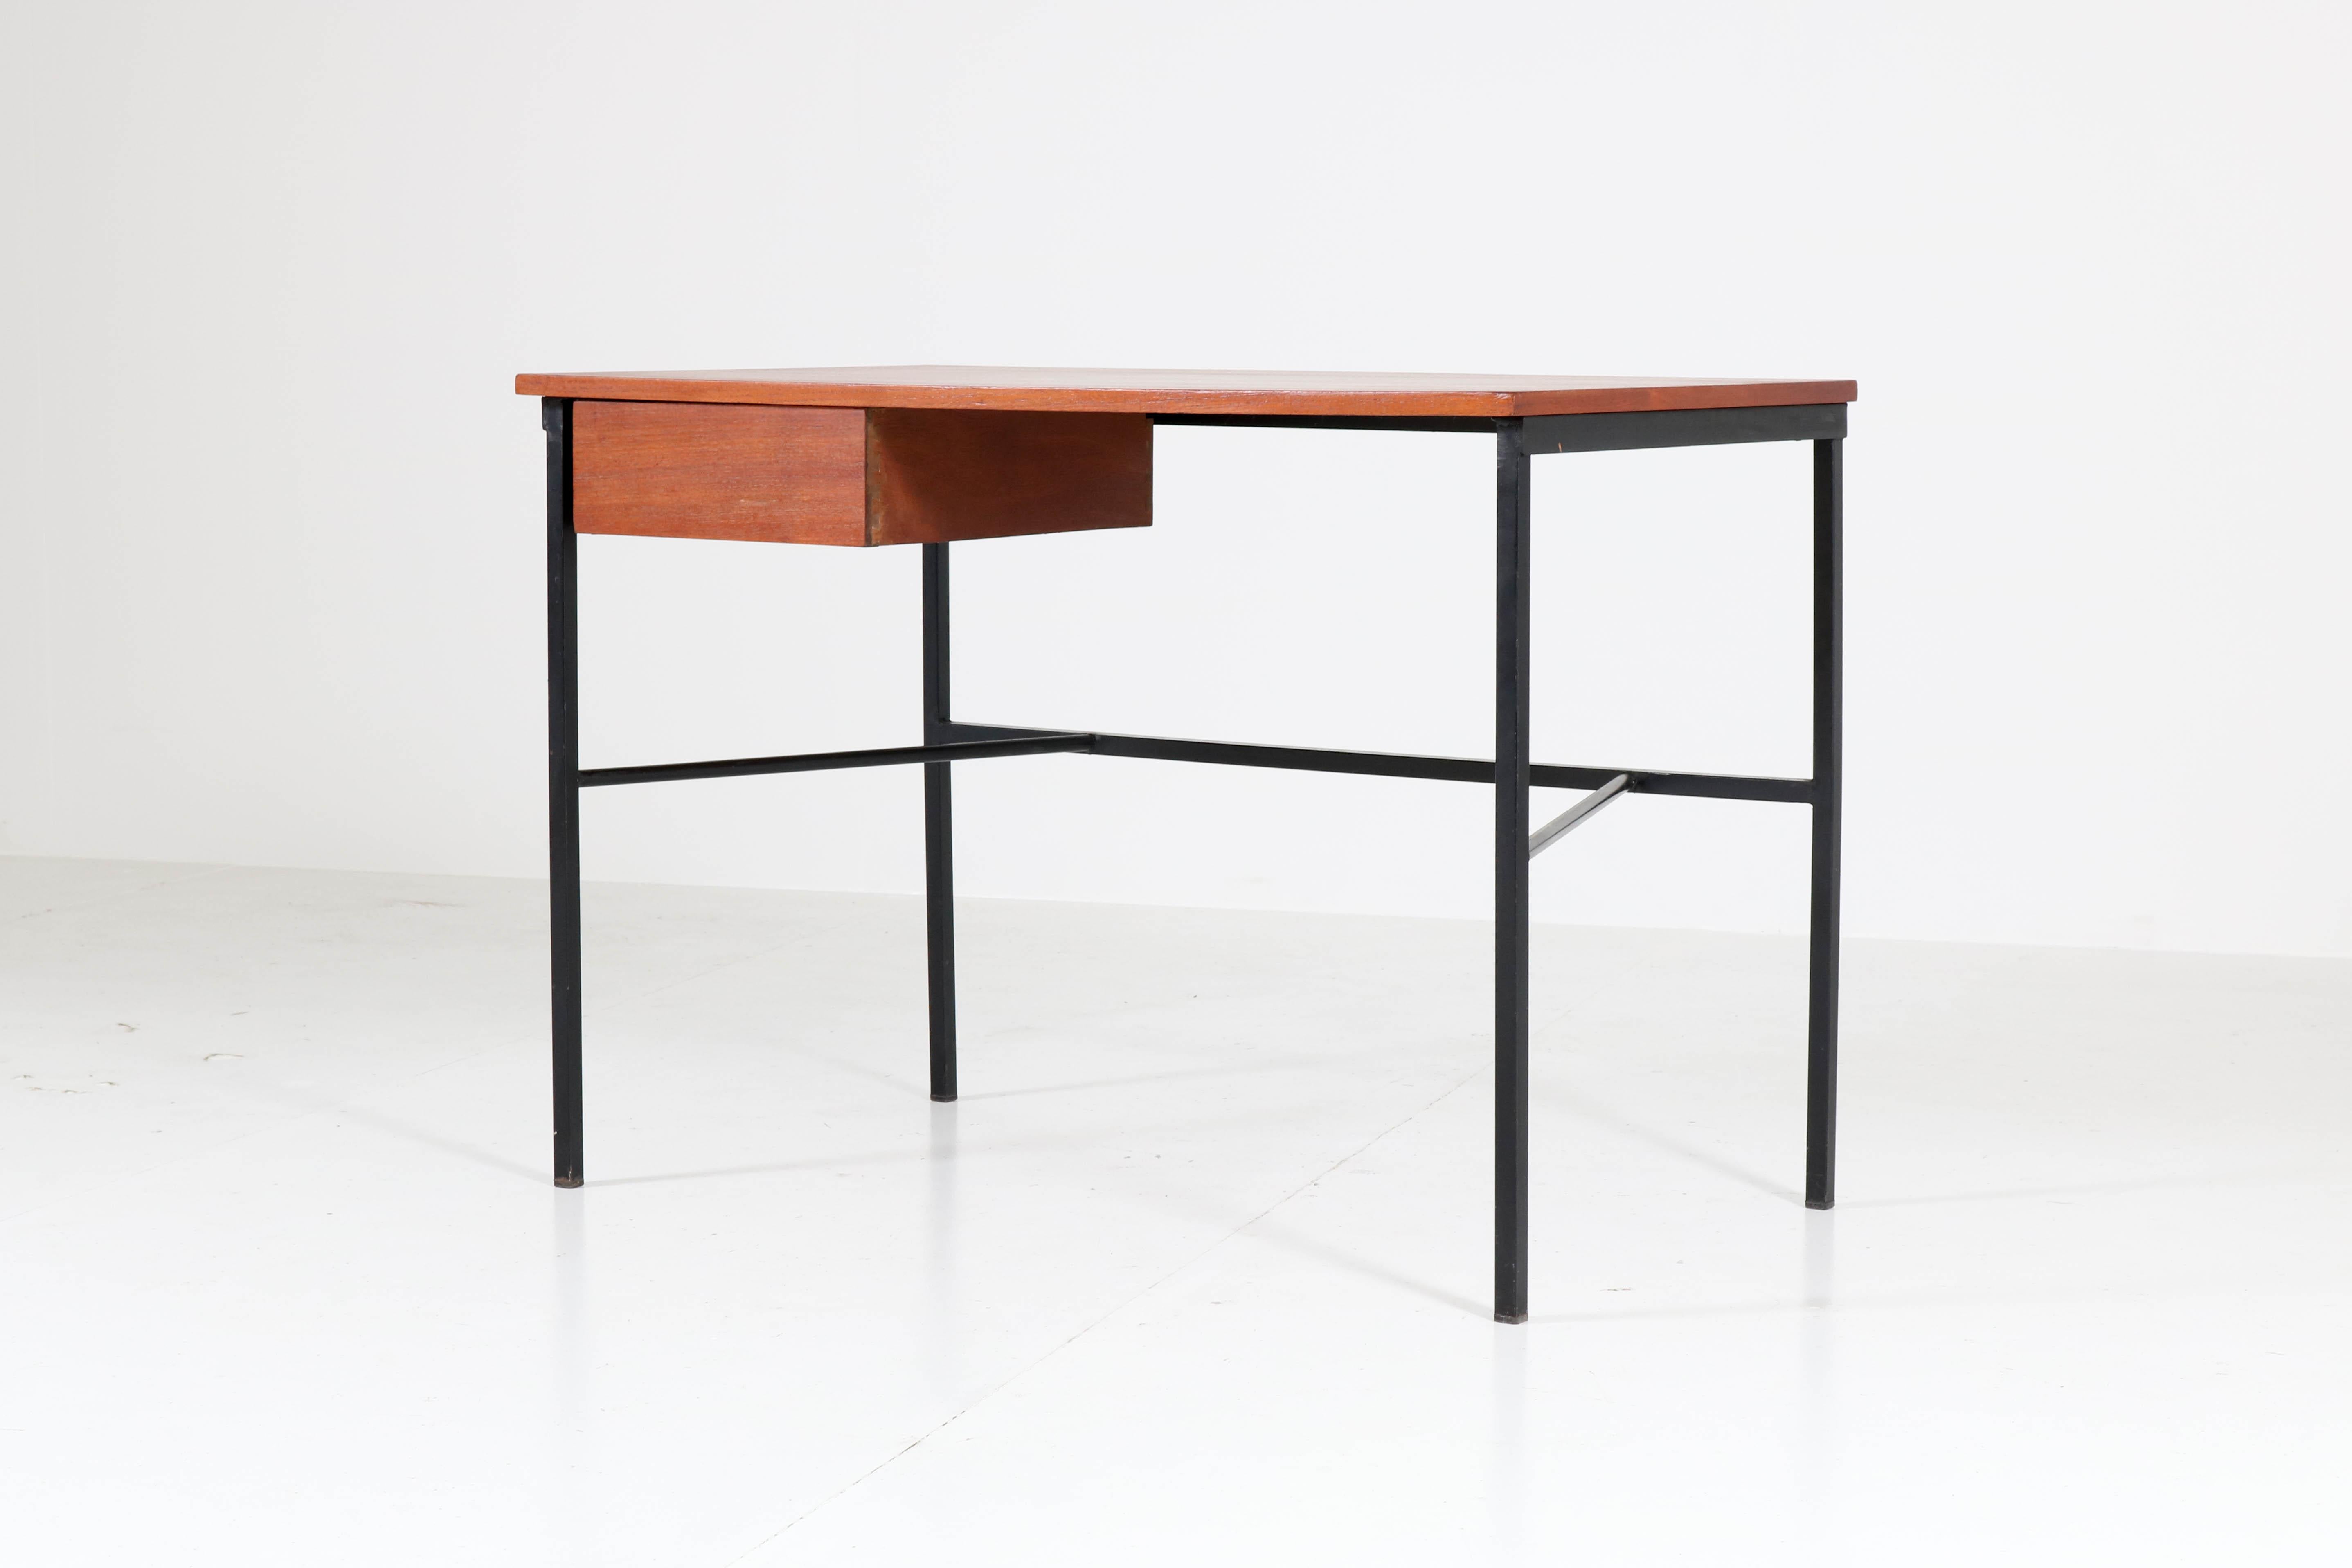 Lacquered Mid-Century Modern CM 174 Desk by Pierre Paulin for Trefac Belgium, 1950s